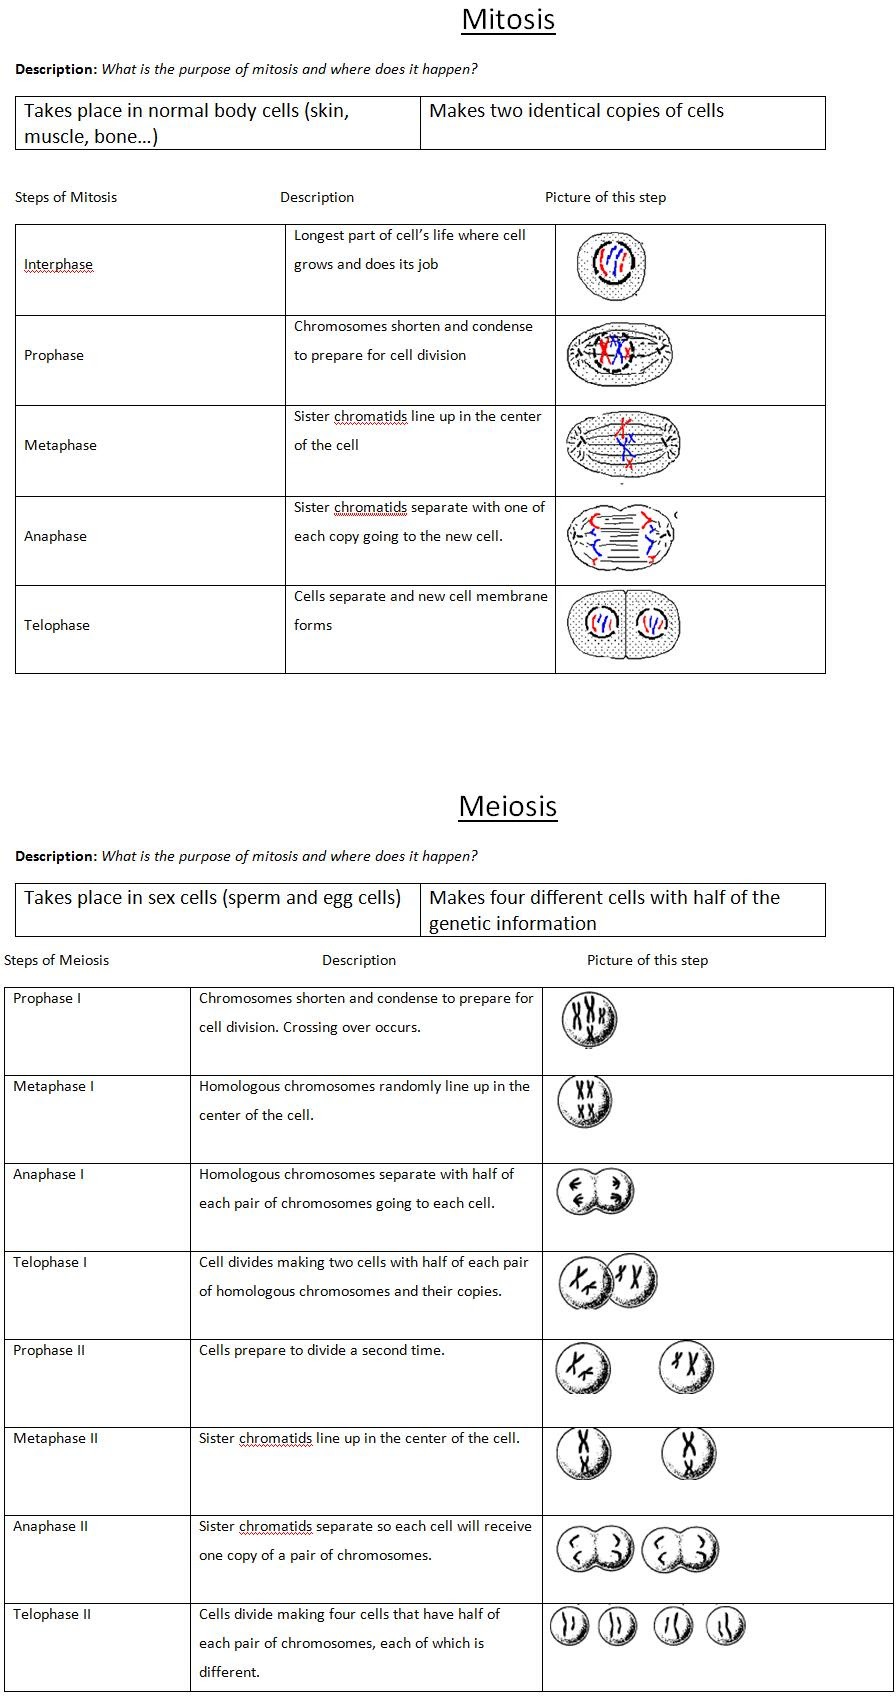 meiosis-1-and-2-worksheet-answers-wiseinspire